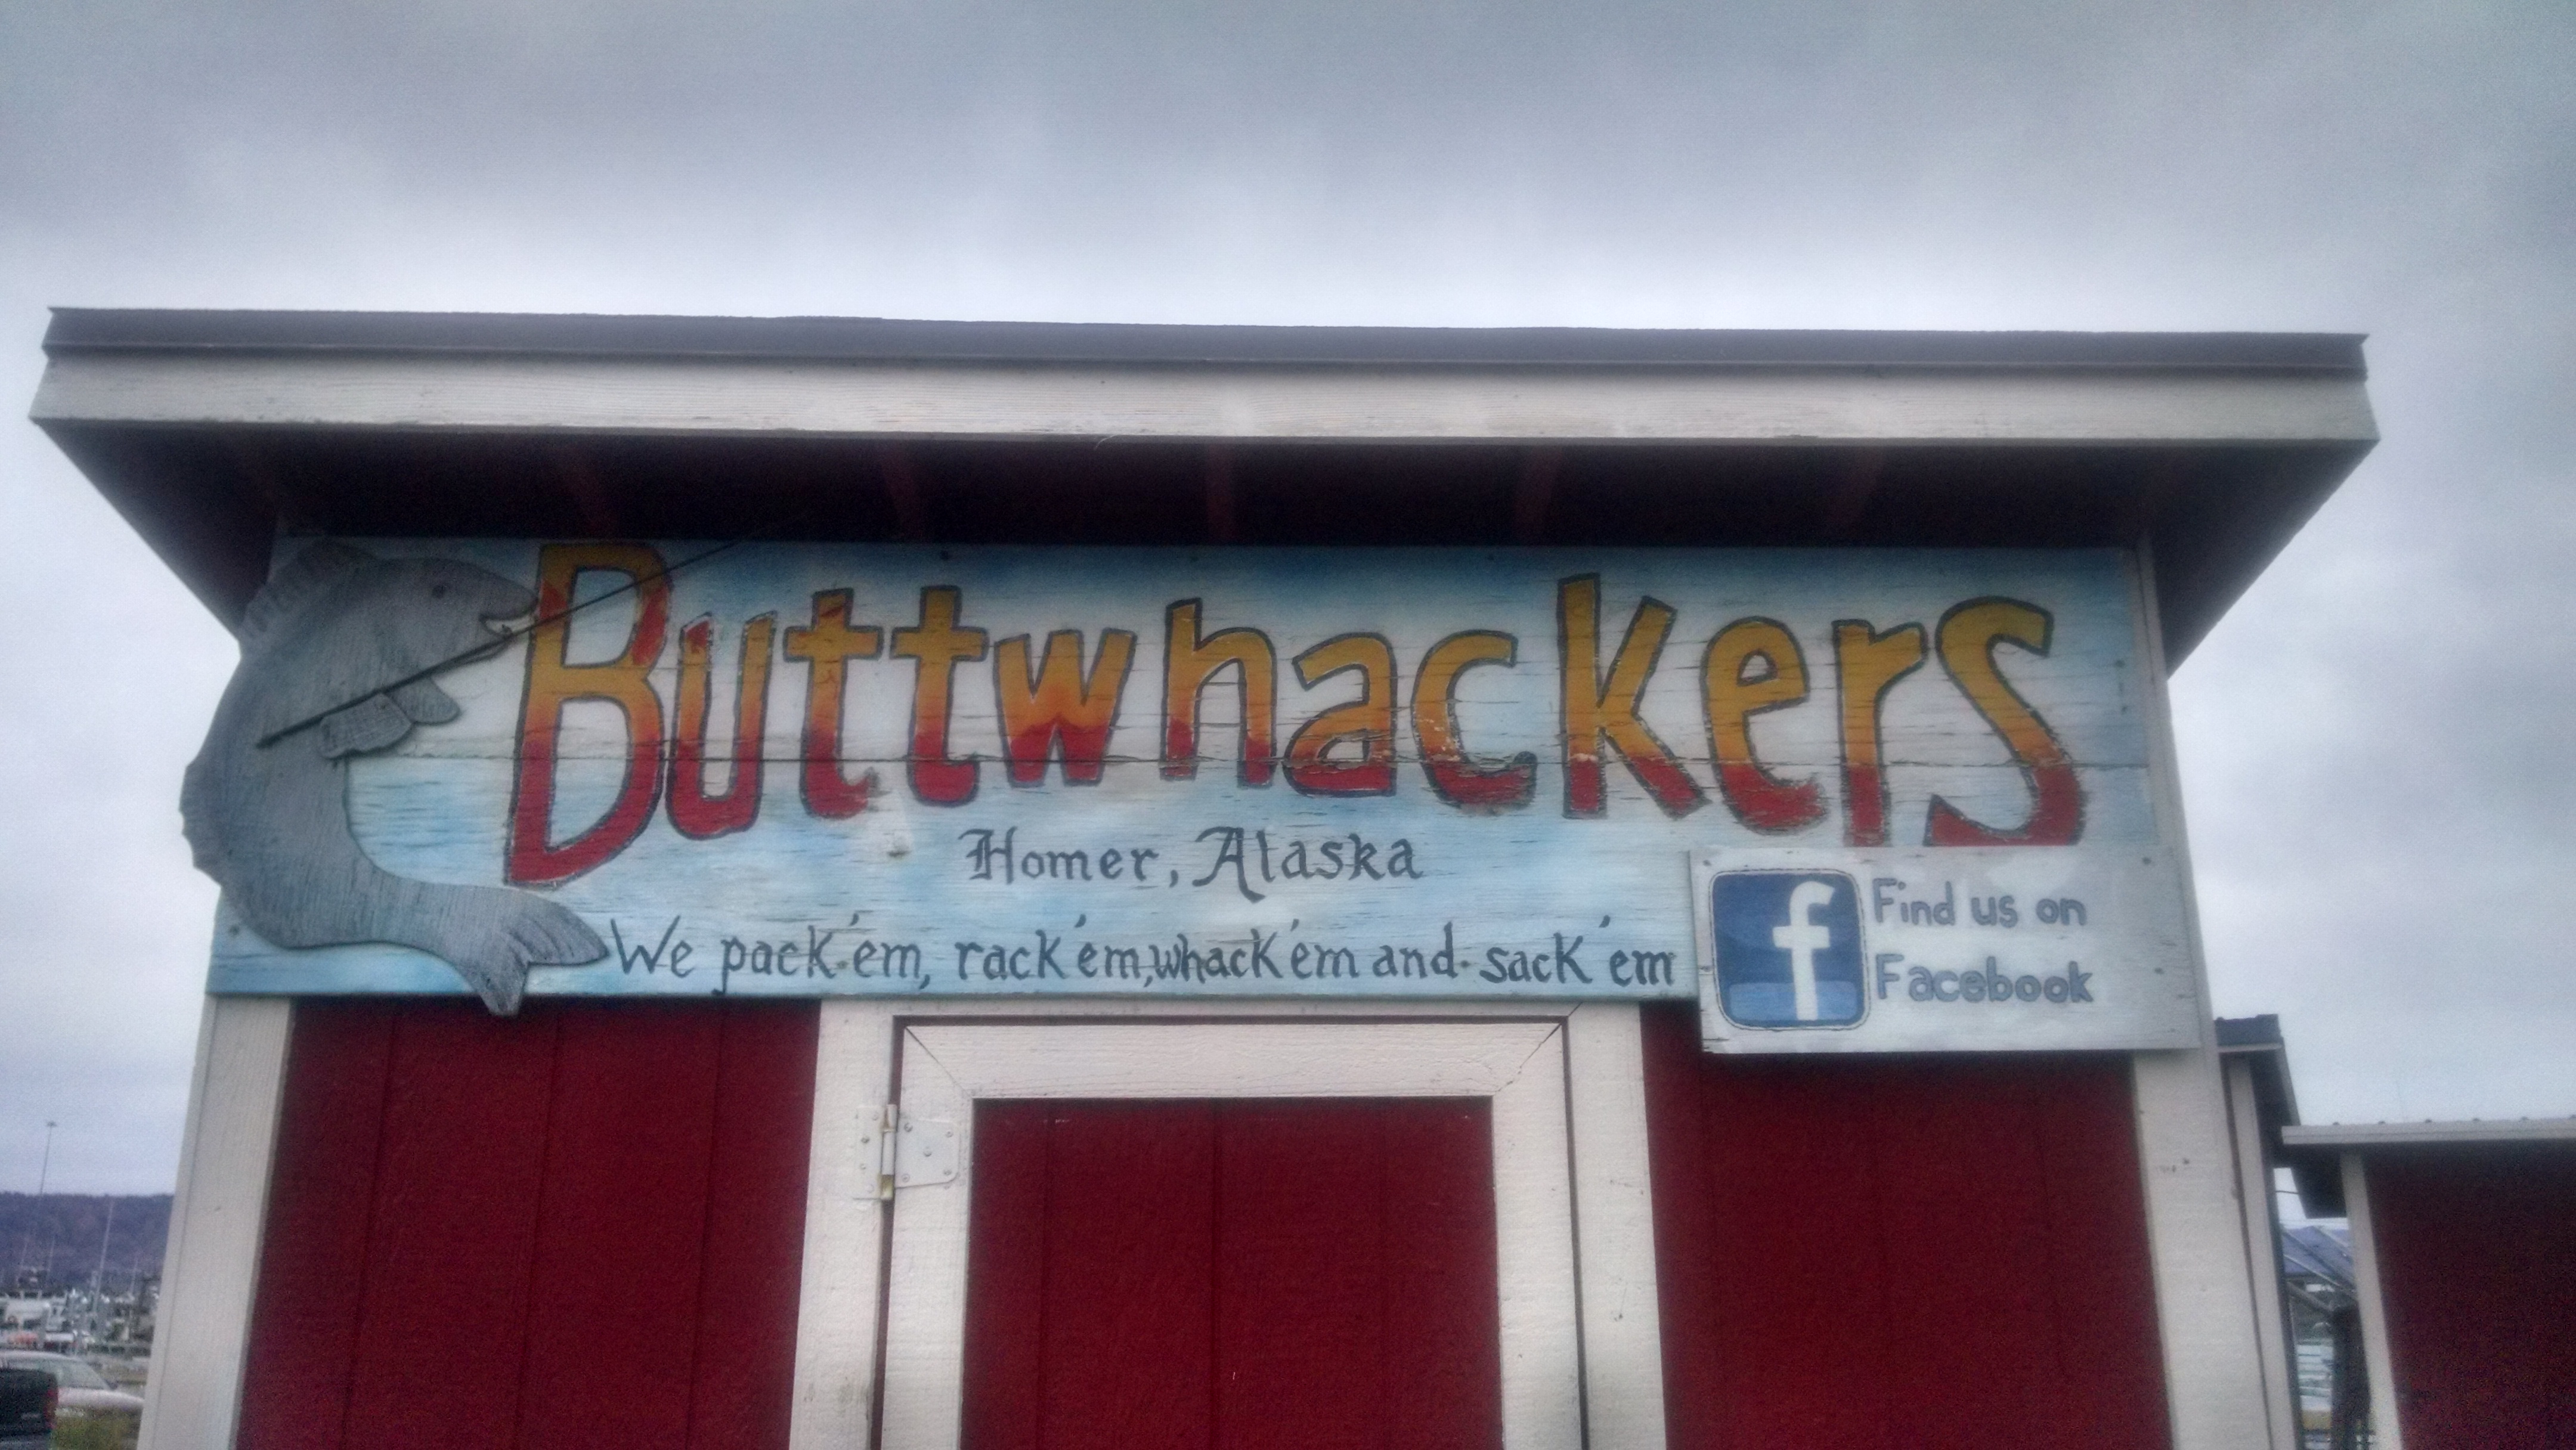 Buttwhackers fish packing shack